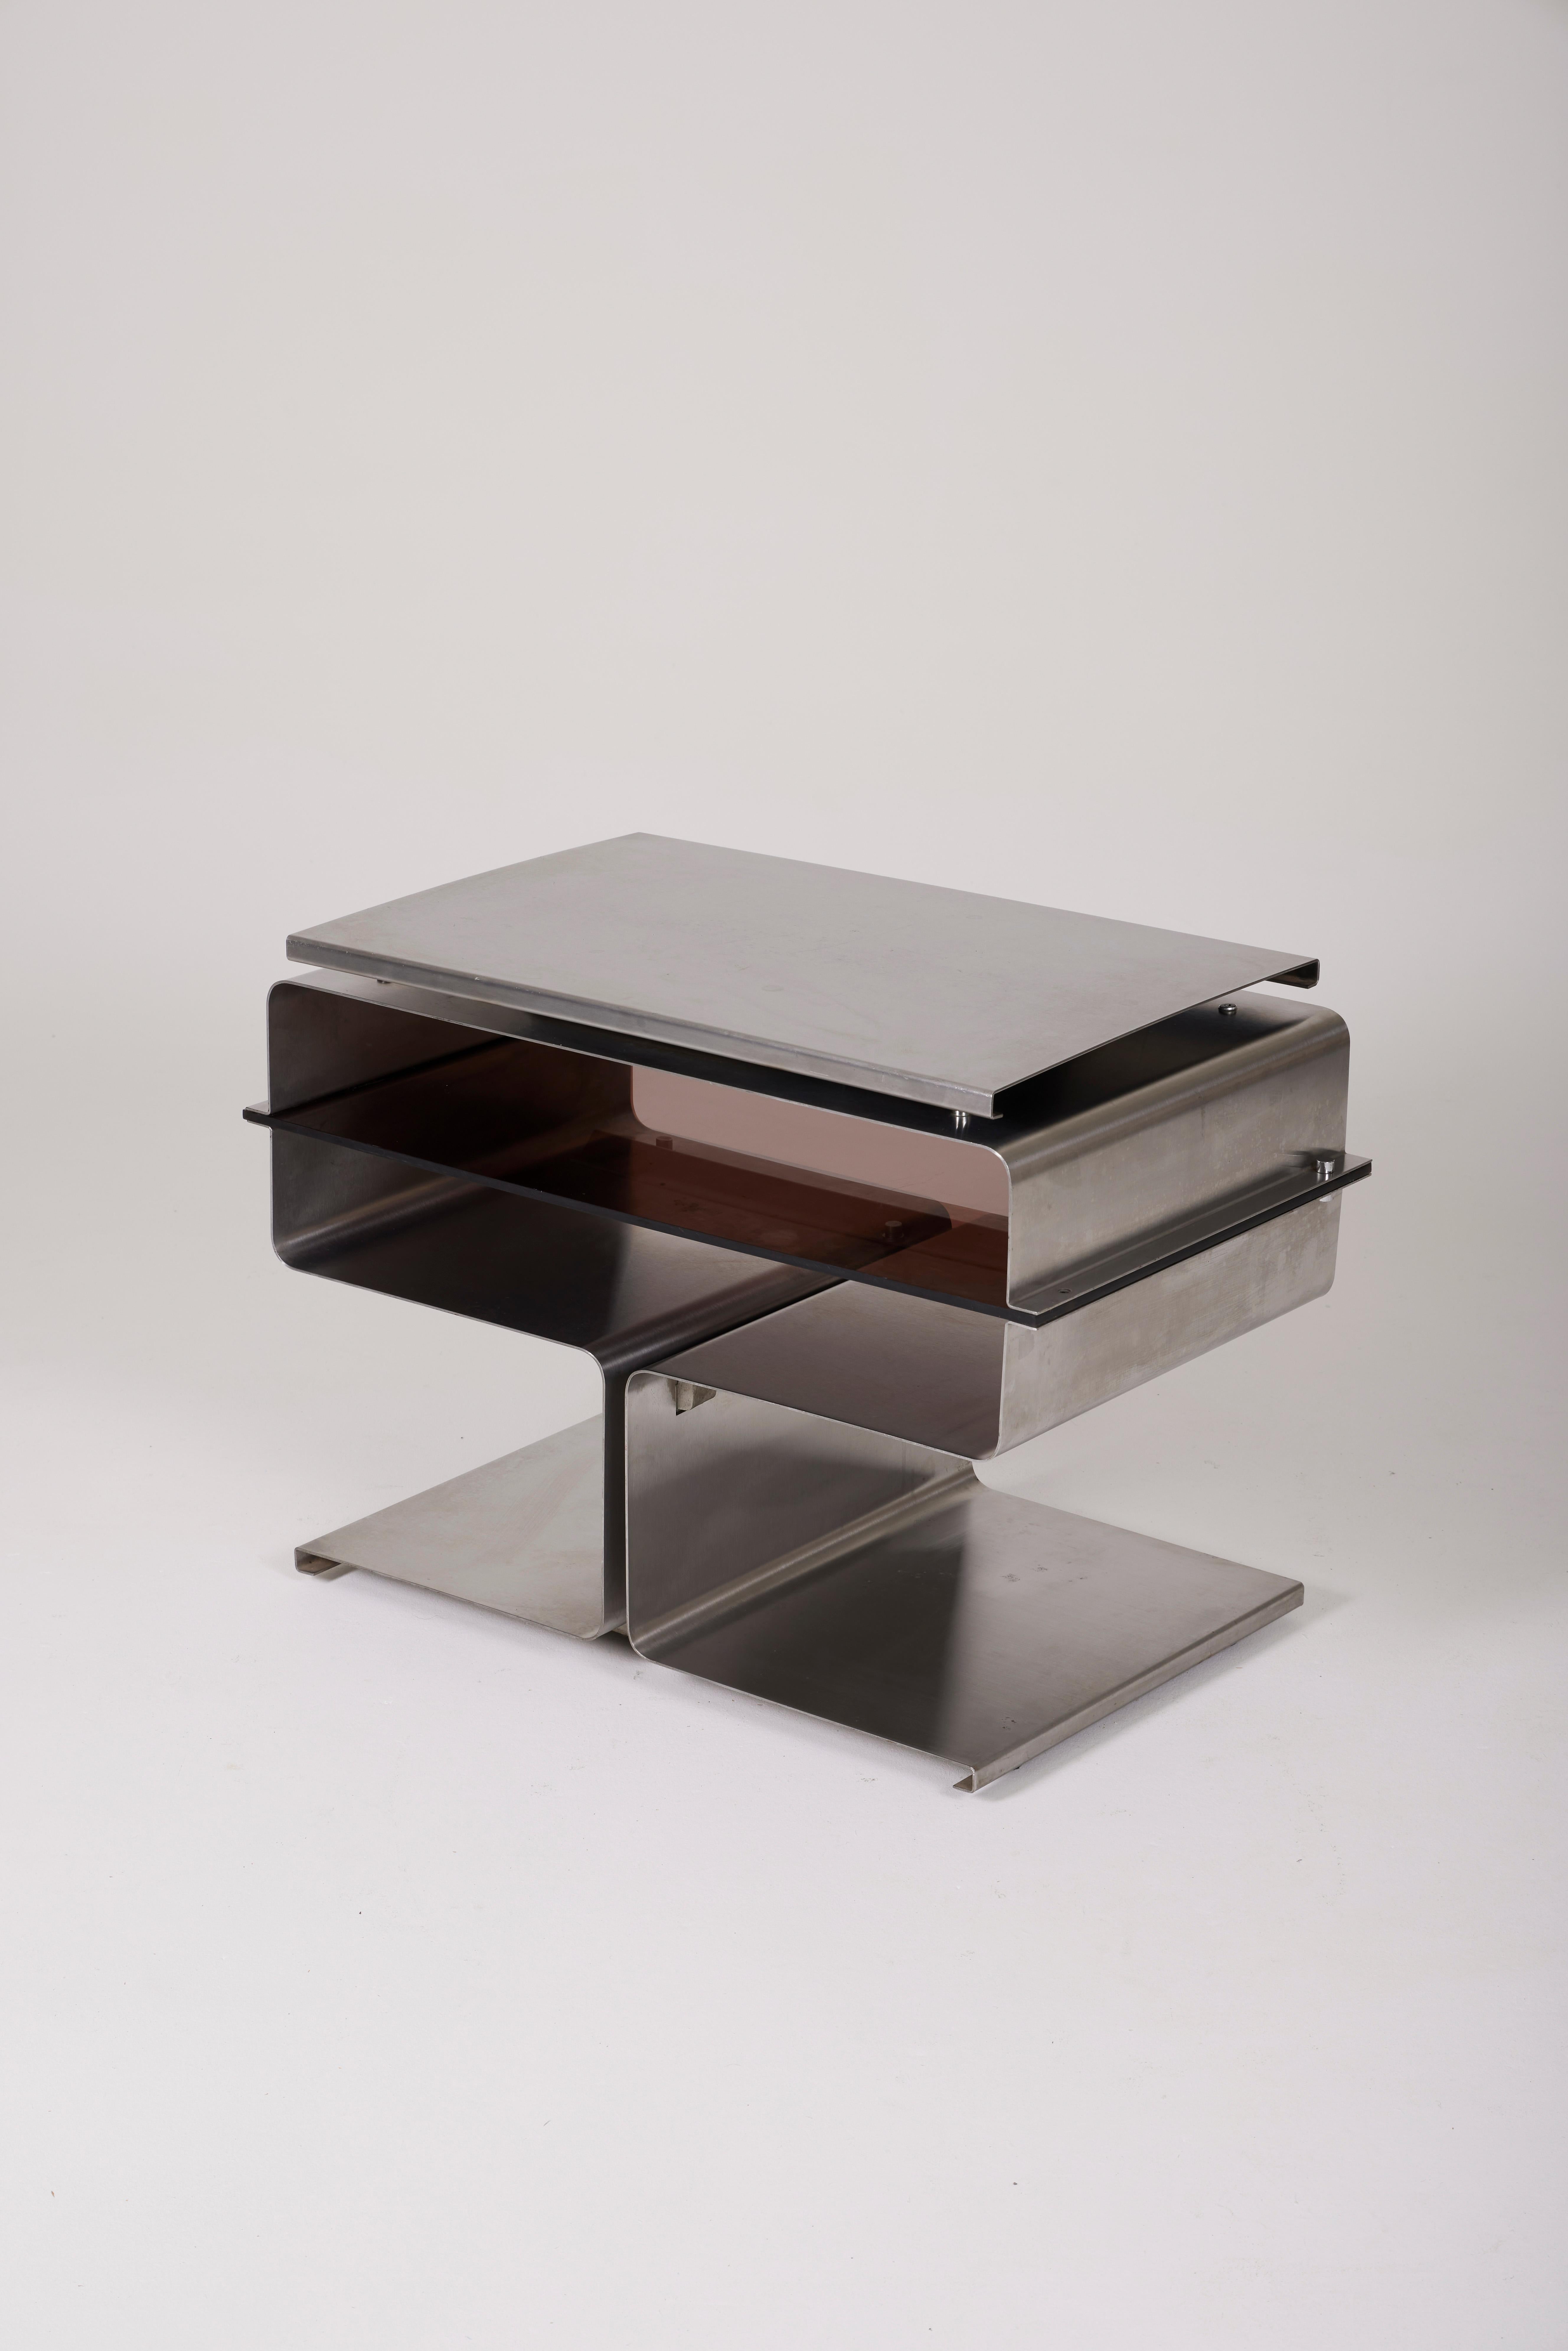 Side table or console by designer François Monnet, 70s. This table is in brushed steel. It has a turntable and a smoked glass shelf. 
Lp1243